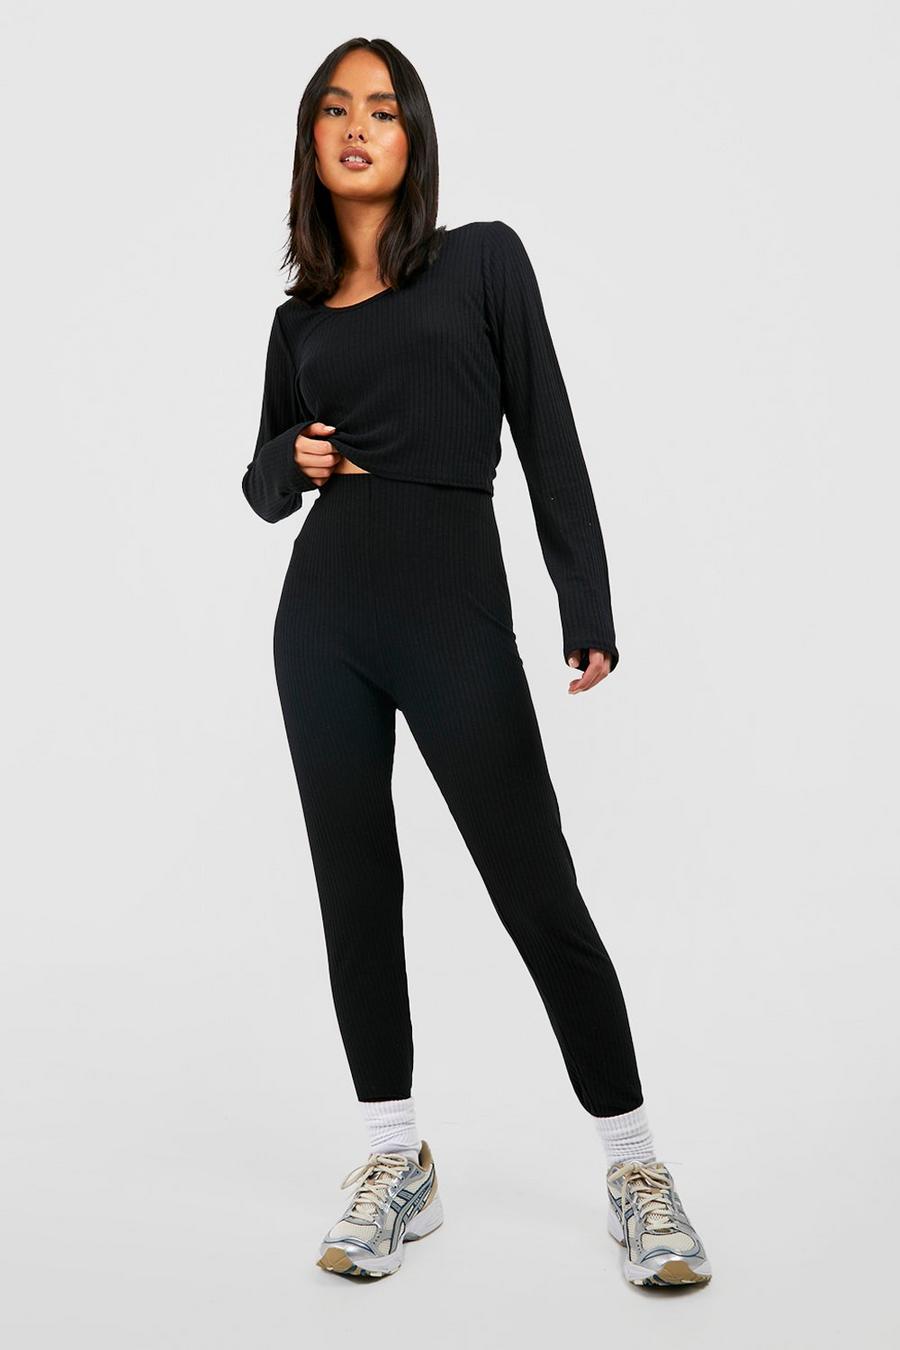 Black Soft Rib Knit Long Sleeve Top And Leggings Co-ord image number 1